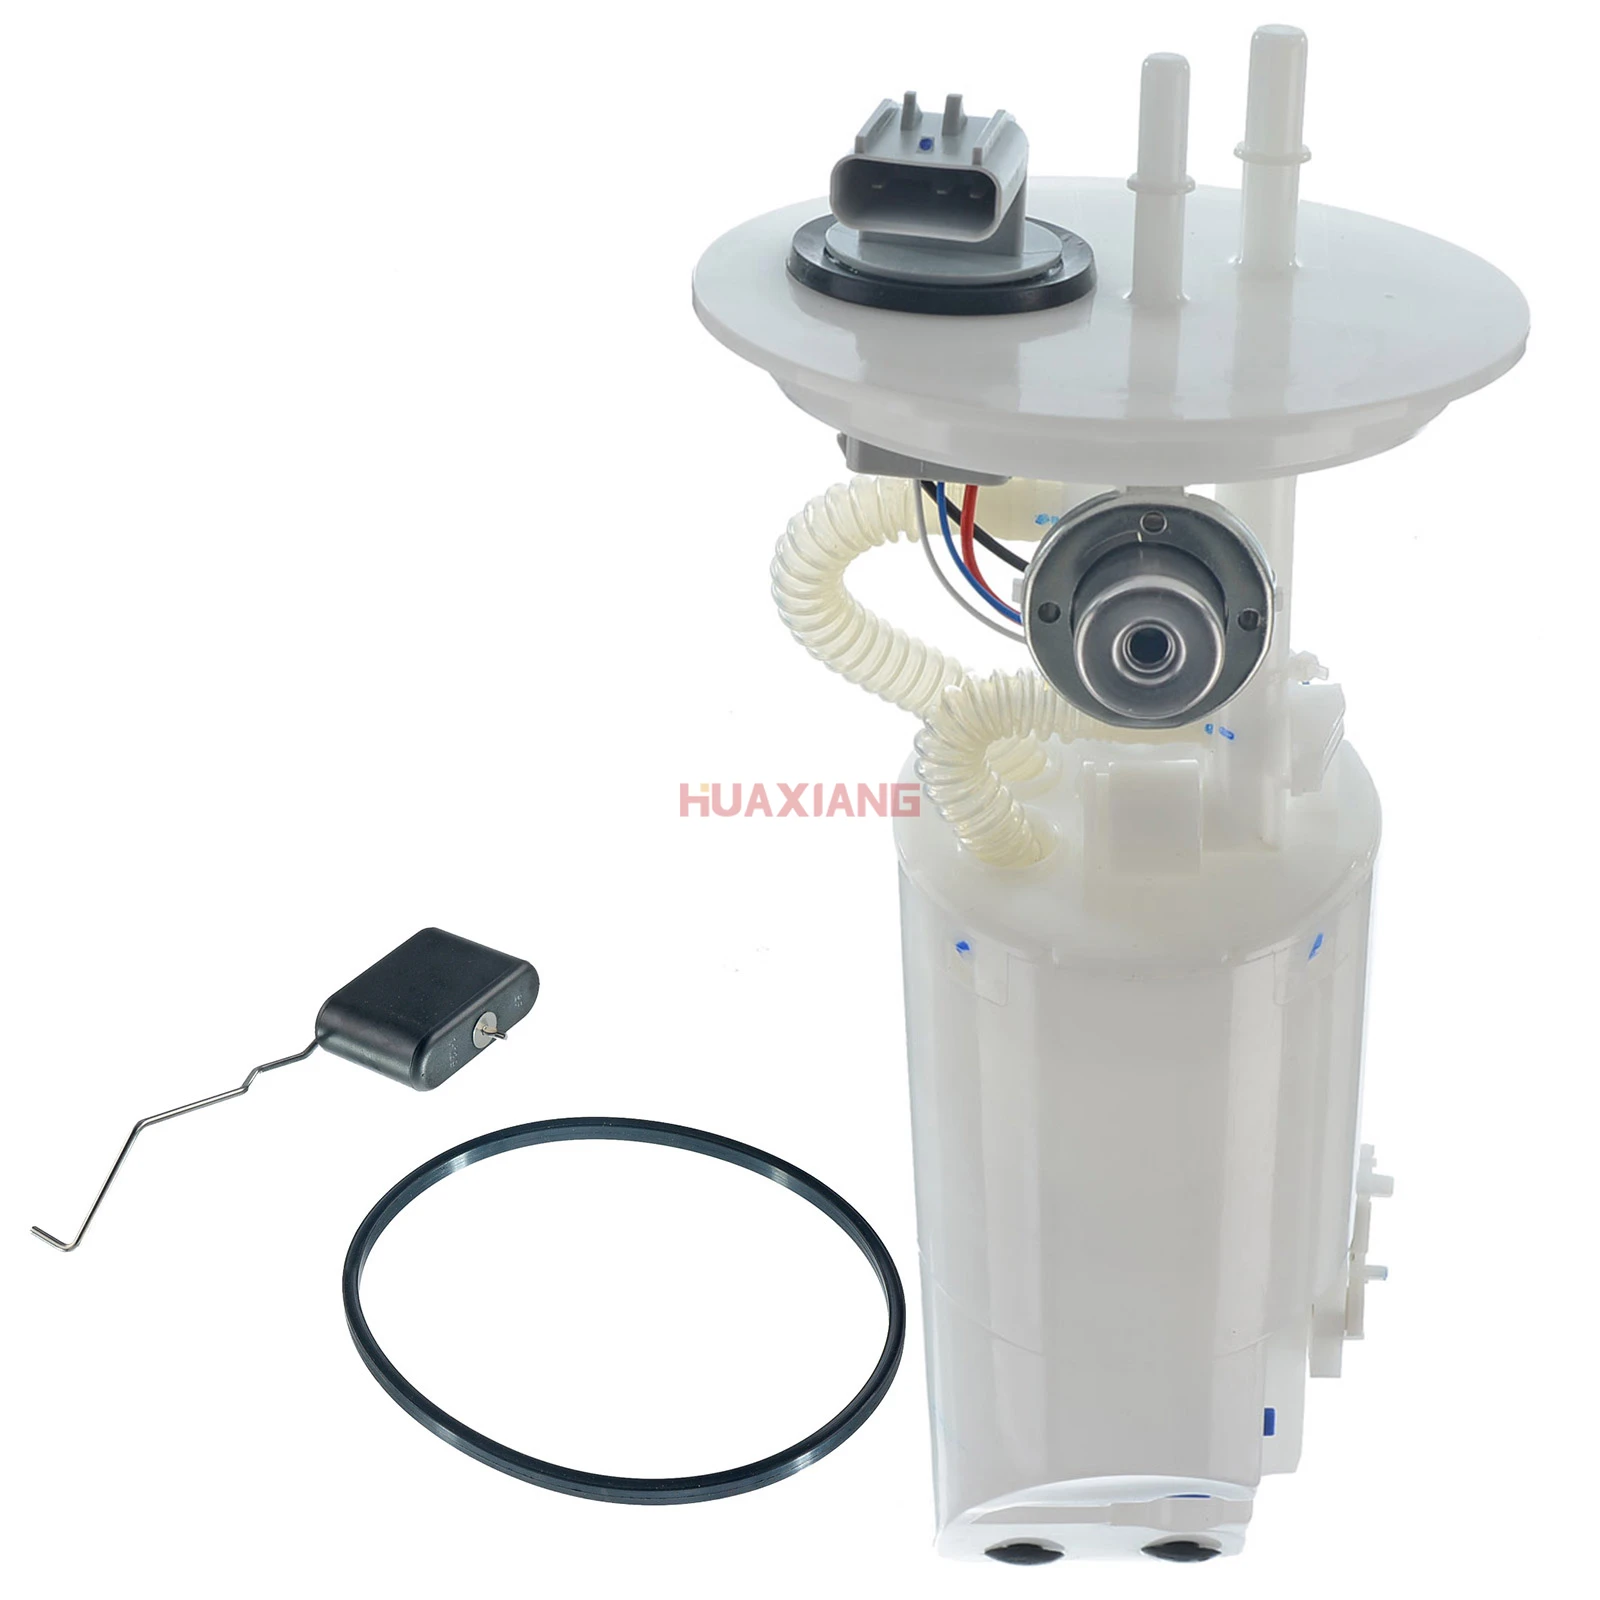 

DE/GM Electric Fuel Pump Assembly for Chrysler Dodge Plymouth Town & Country Caravan 1996-2000